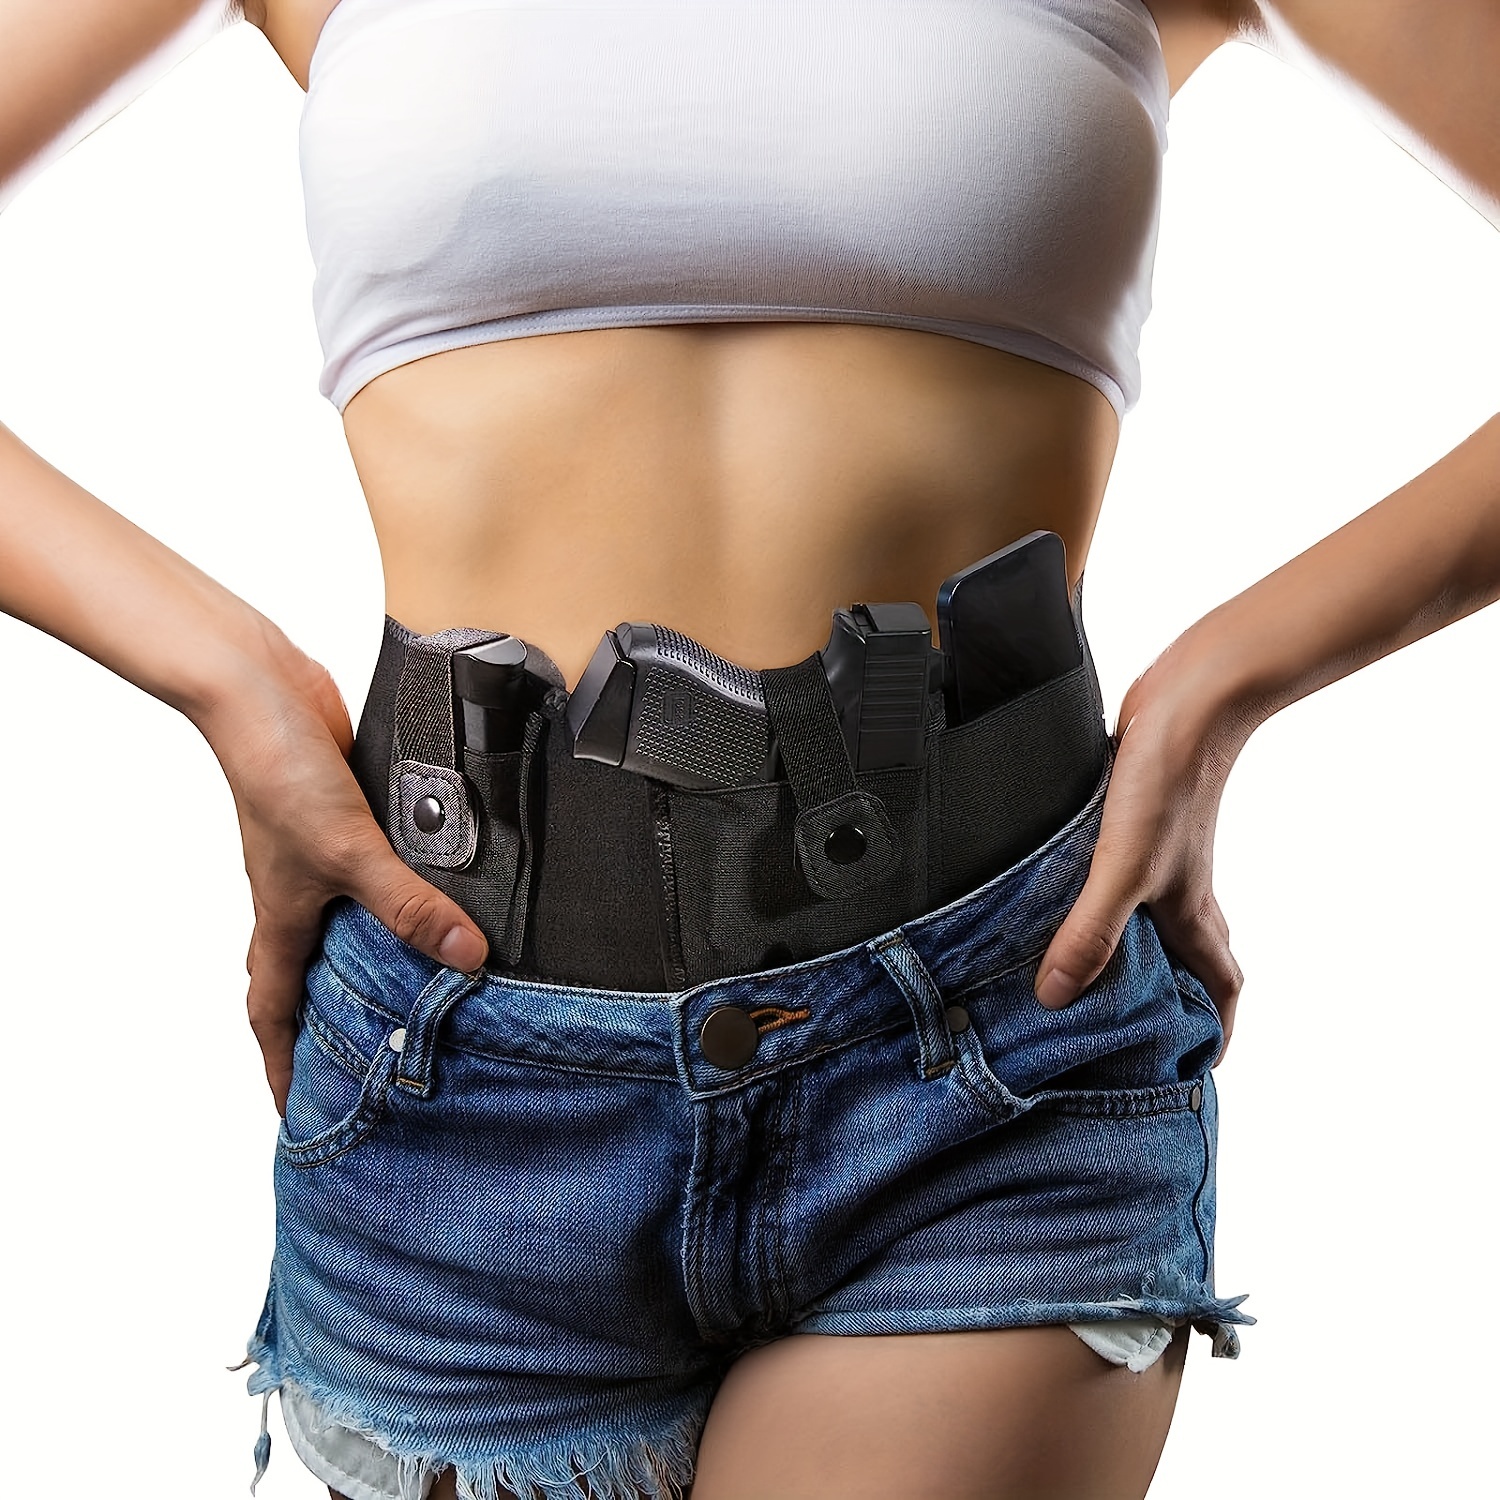  Accmor Belly Band Holster for Concealed Carry